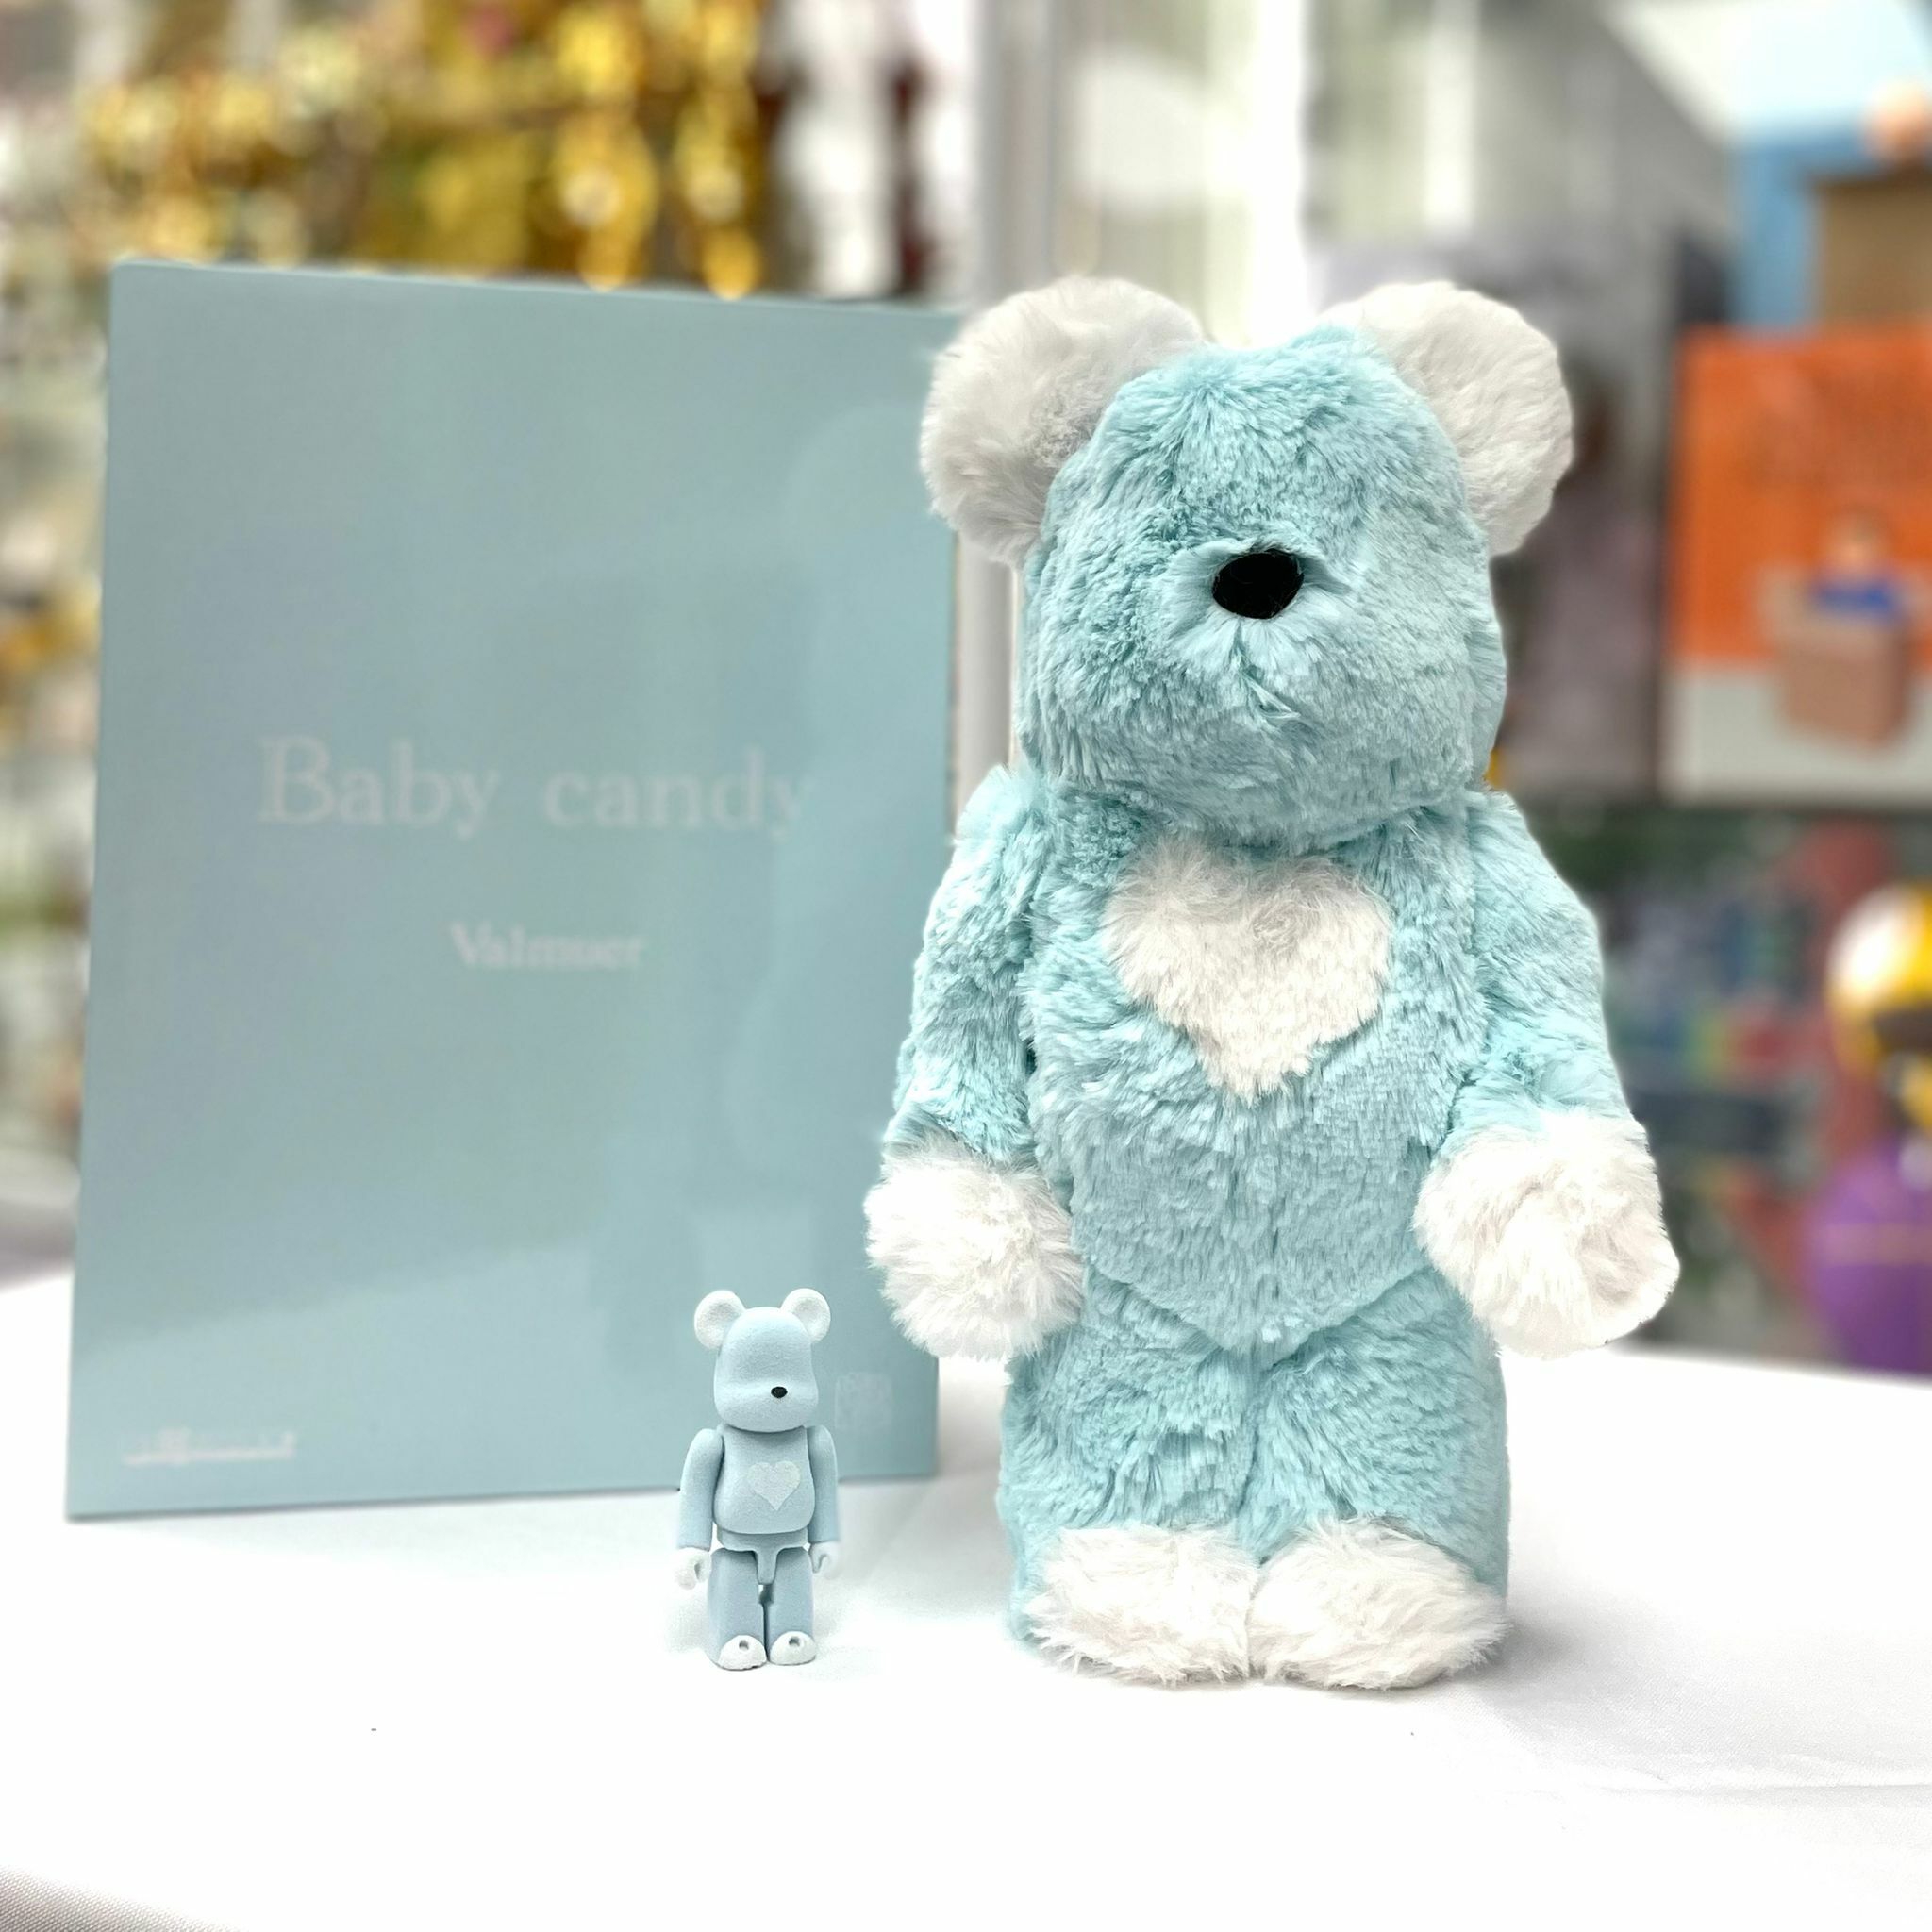 Valmuer × BE@RBRICK「Baby candy 」-